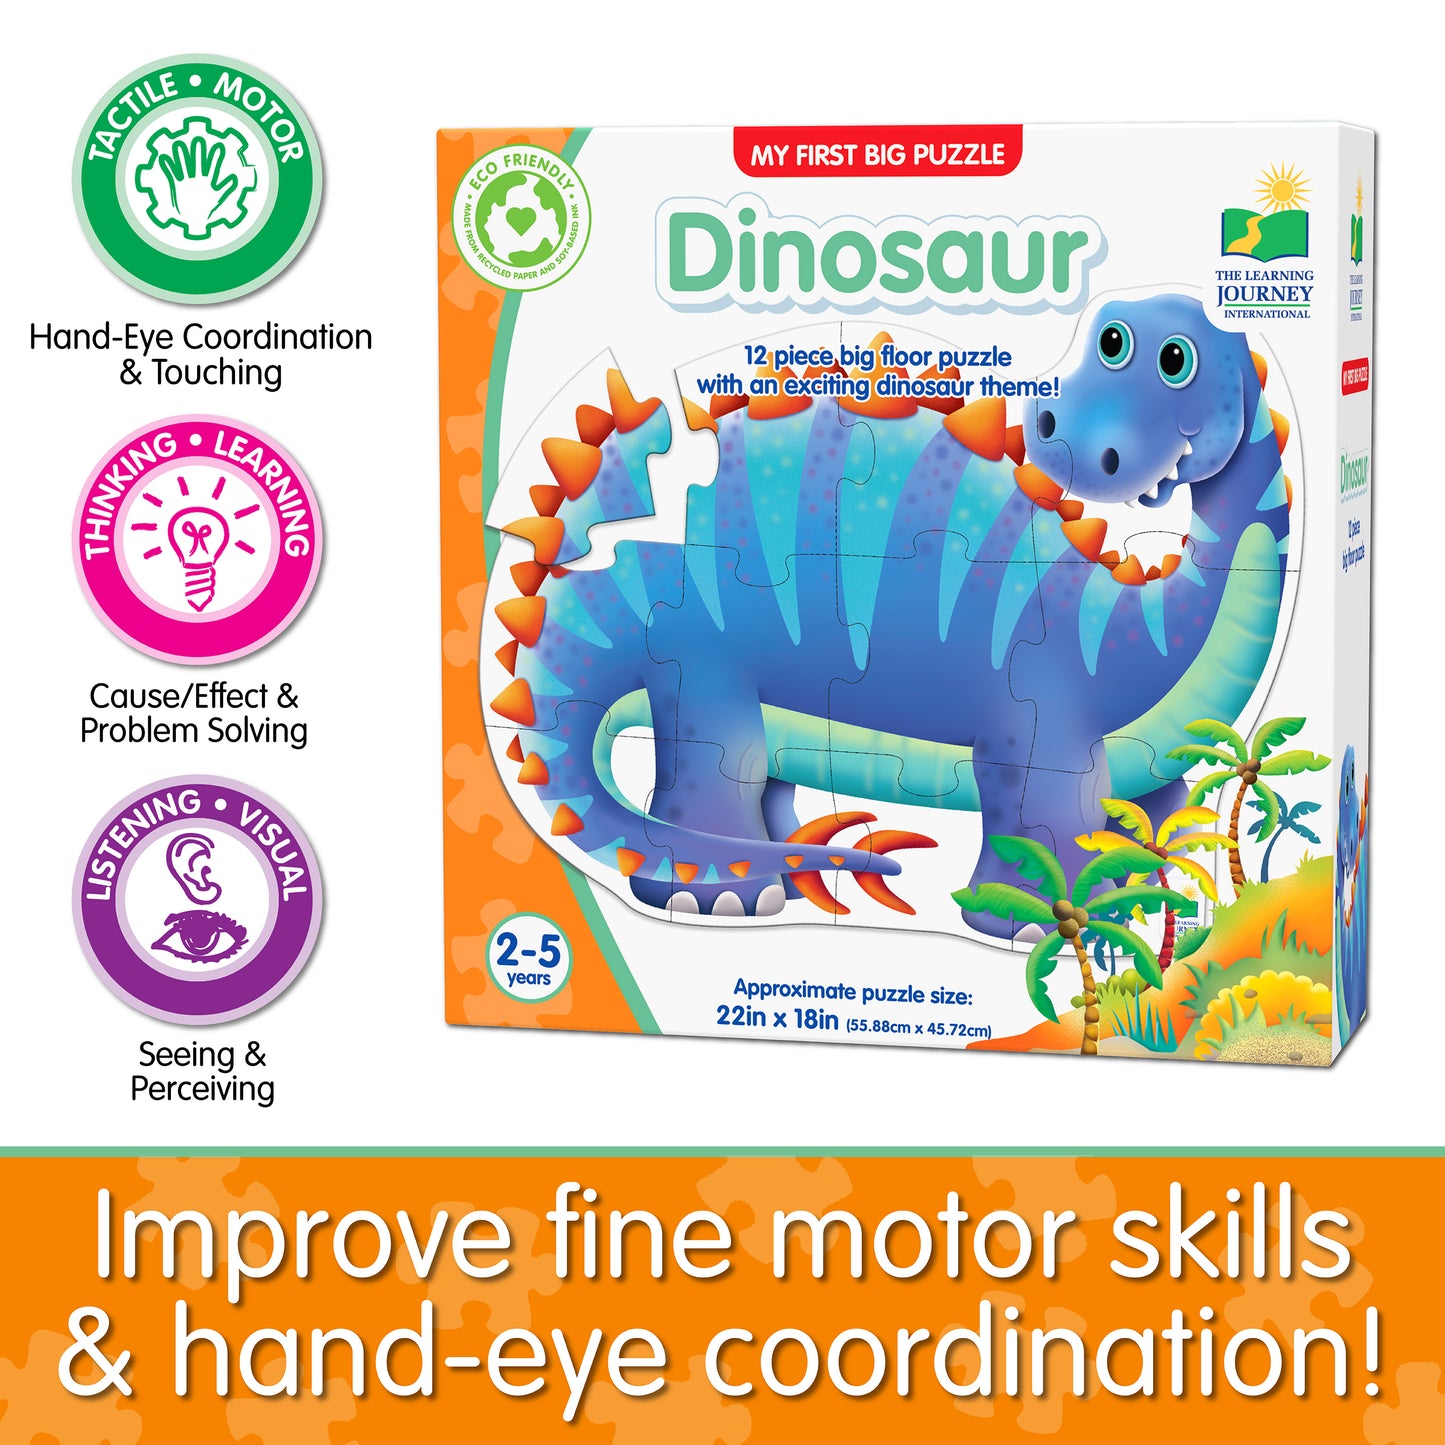 Infographic about My First Big Puzzle - Dinosaur's educational benefits that says, "Improve fine motor skills and hand-eye coordination!"